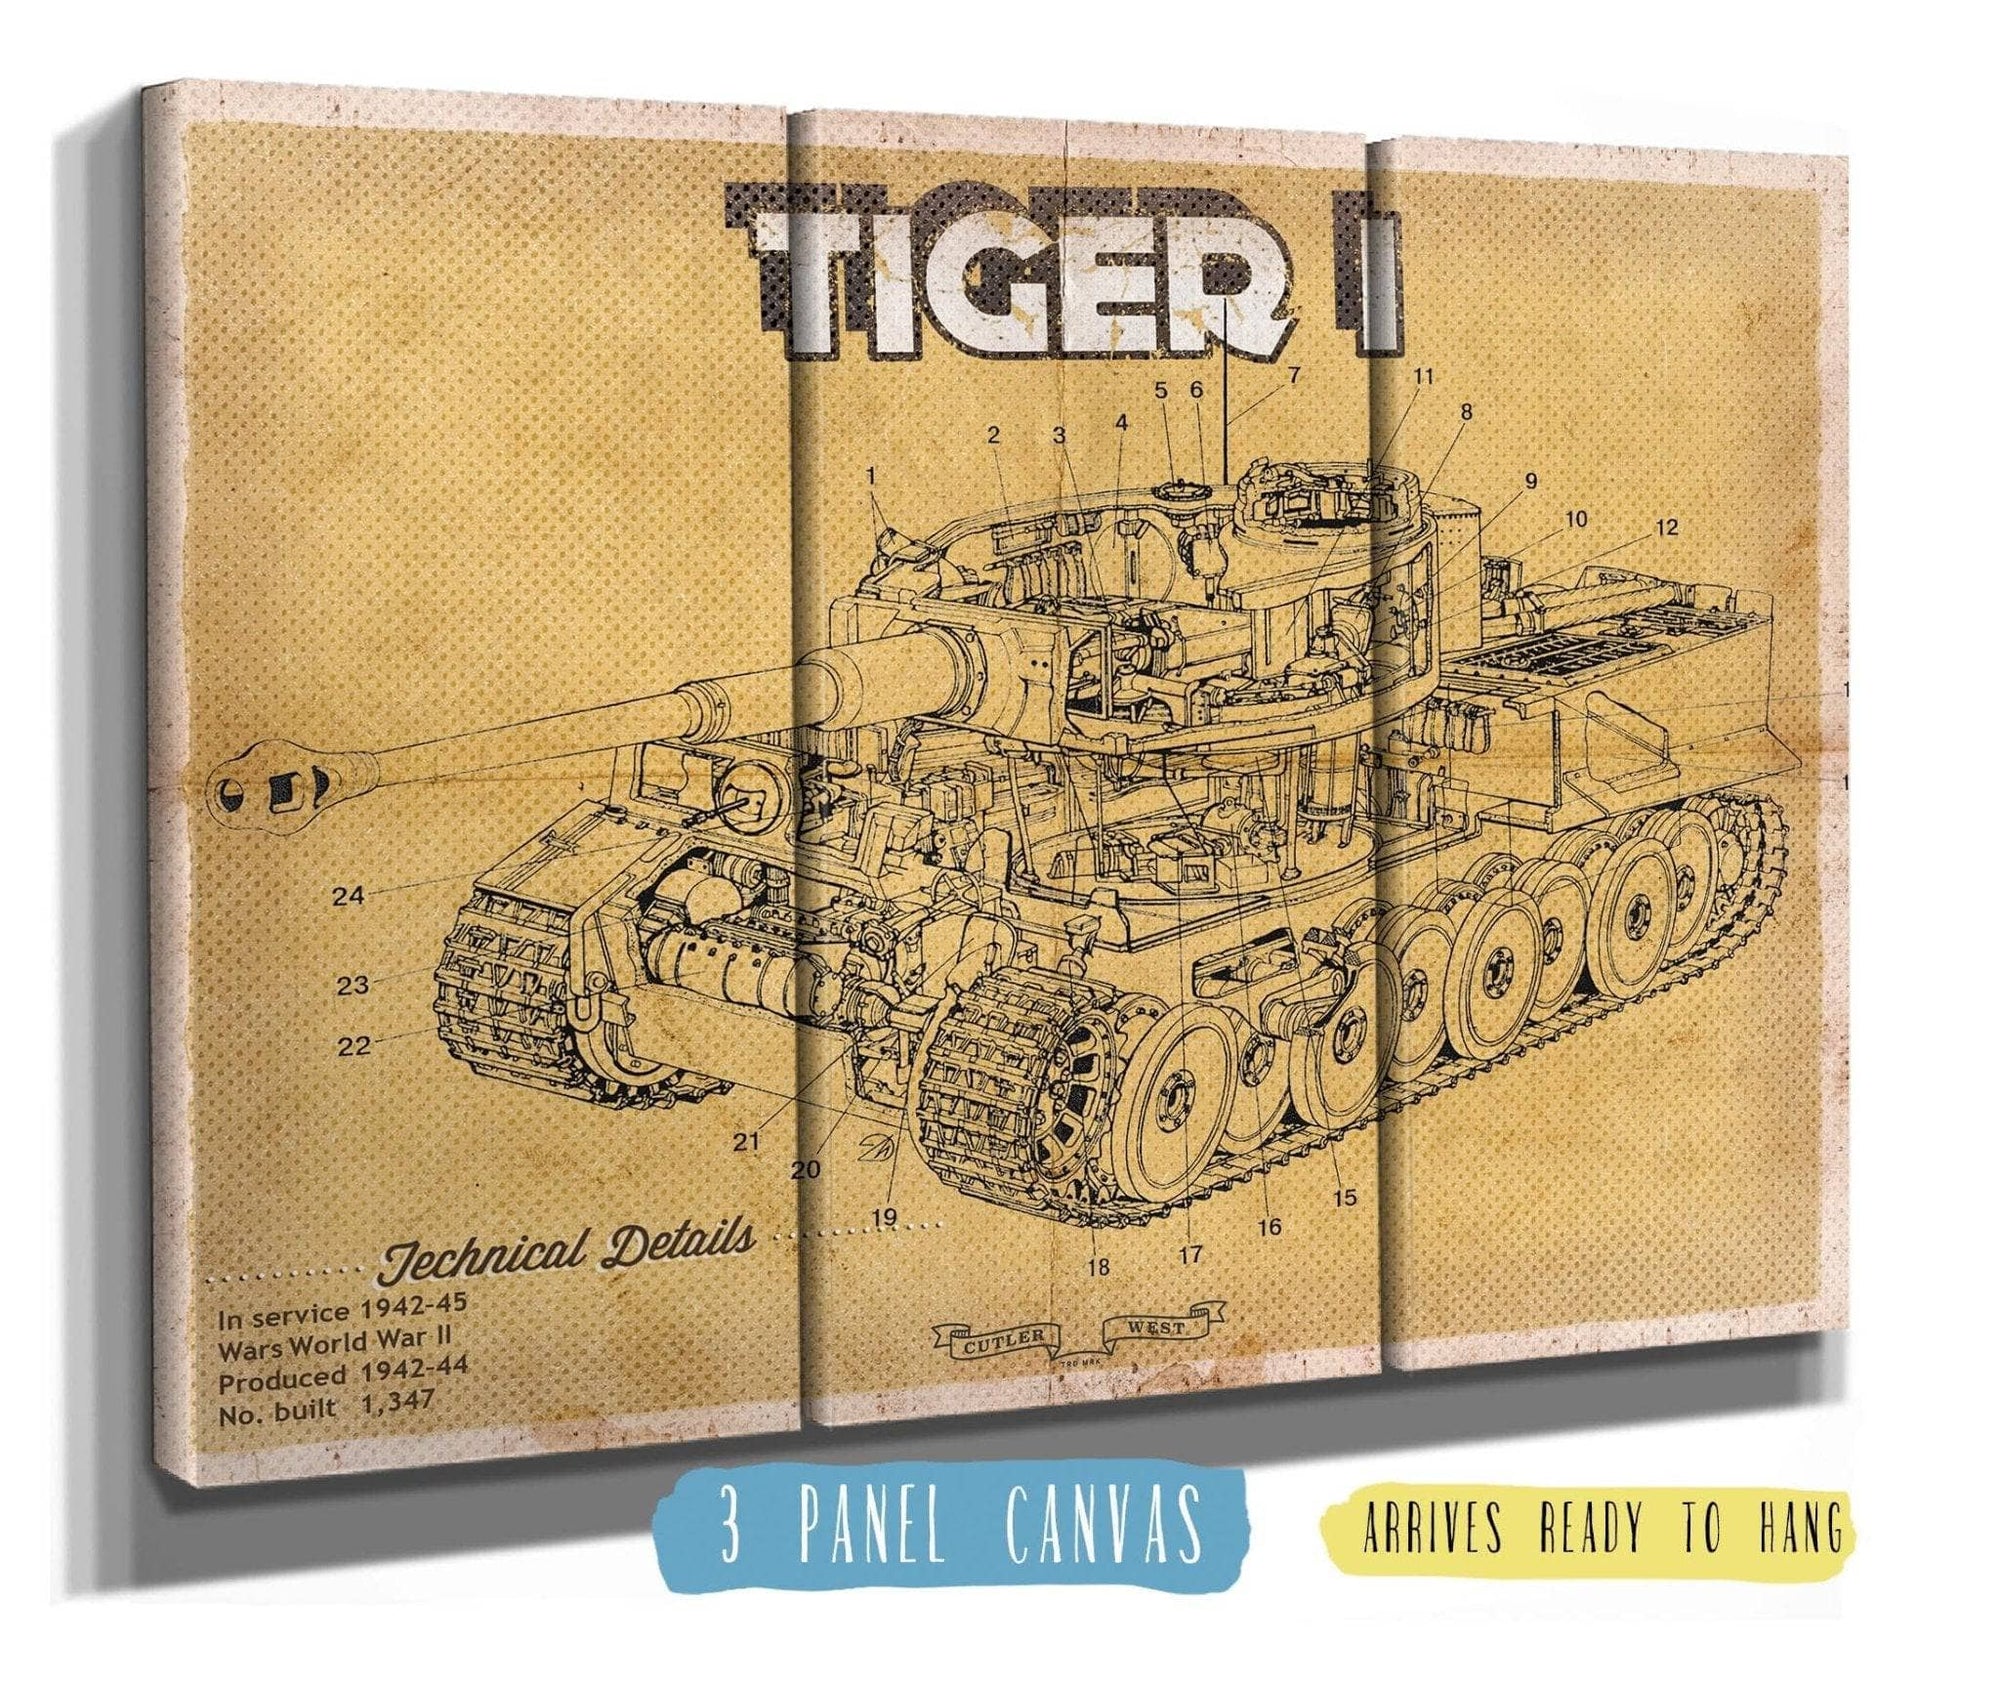 Cutler West Military Weapons Collection 48" x 32" / 3 Panel Canvas Wrap Tiger I Vintage German Tank Military Print 715557733_25242